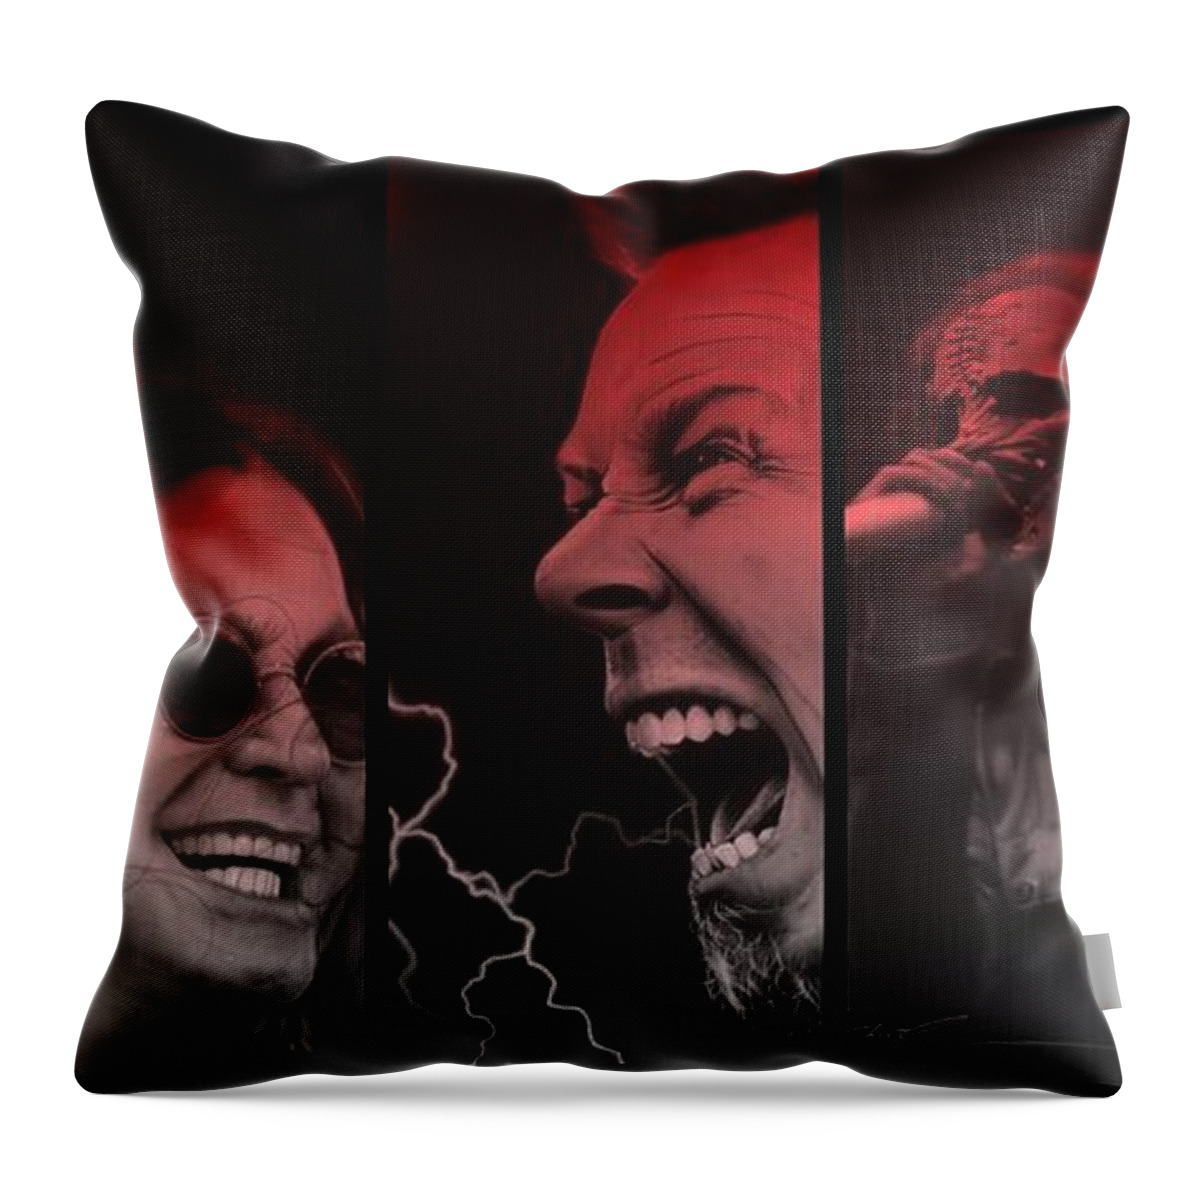 Metallica Throw Pillow featuring the painting Metal Collage by Christian Chapman Art